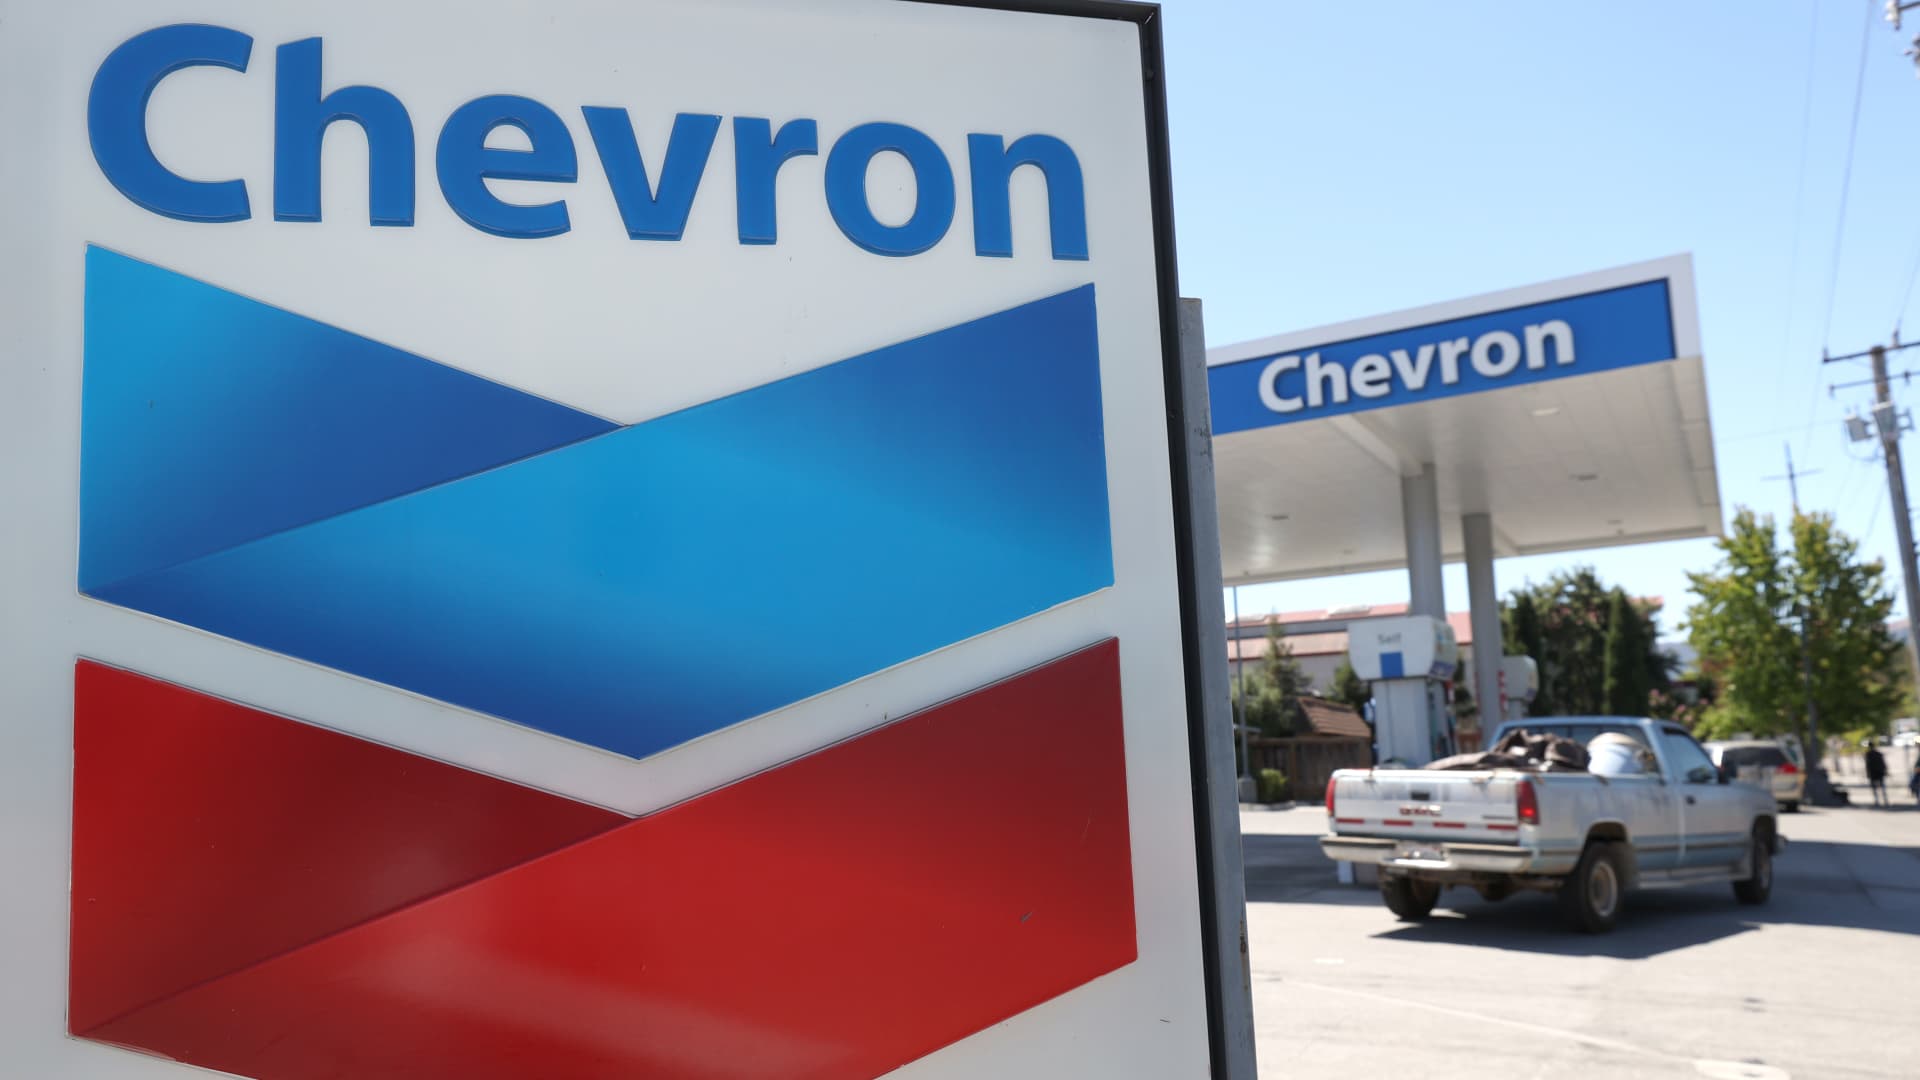 U.S. issues expanded license to allow Chevron to import Venezuelan oil